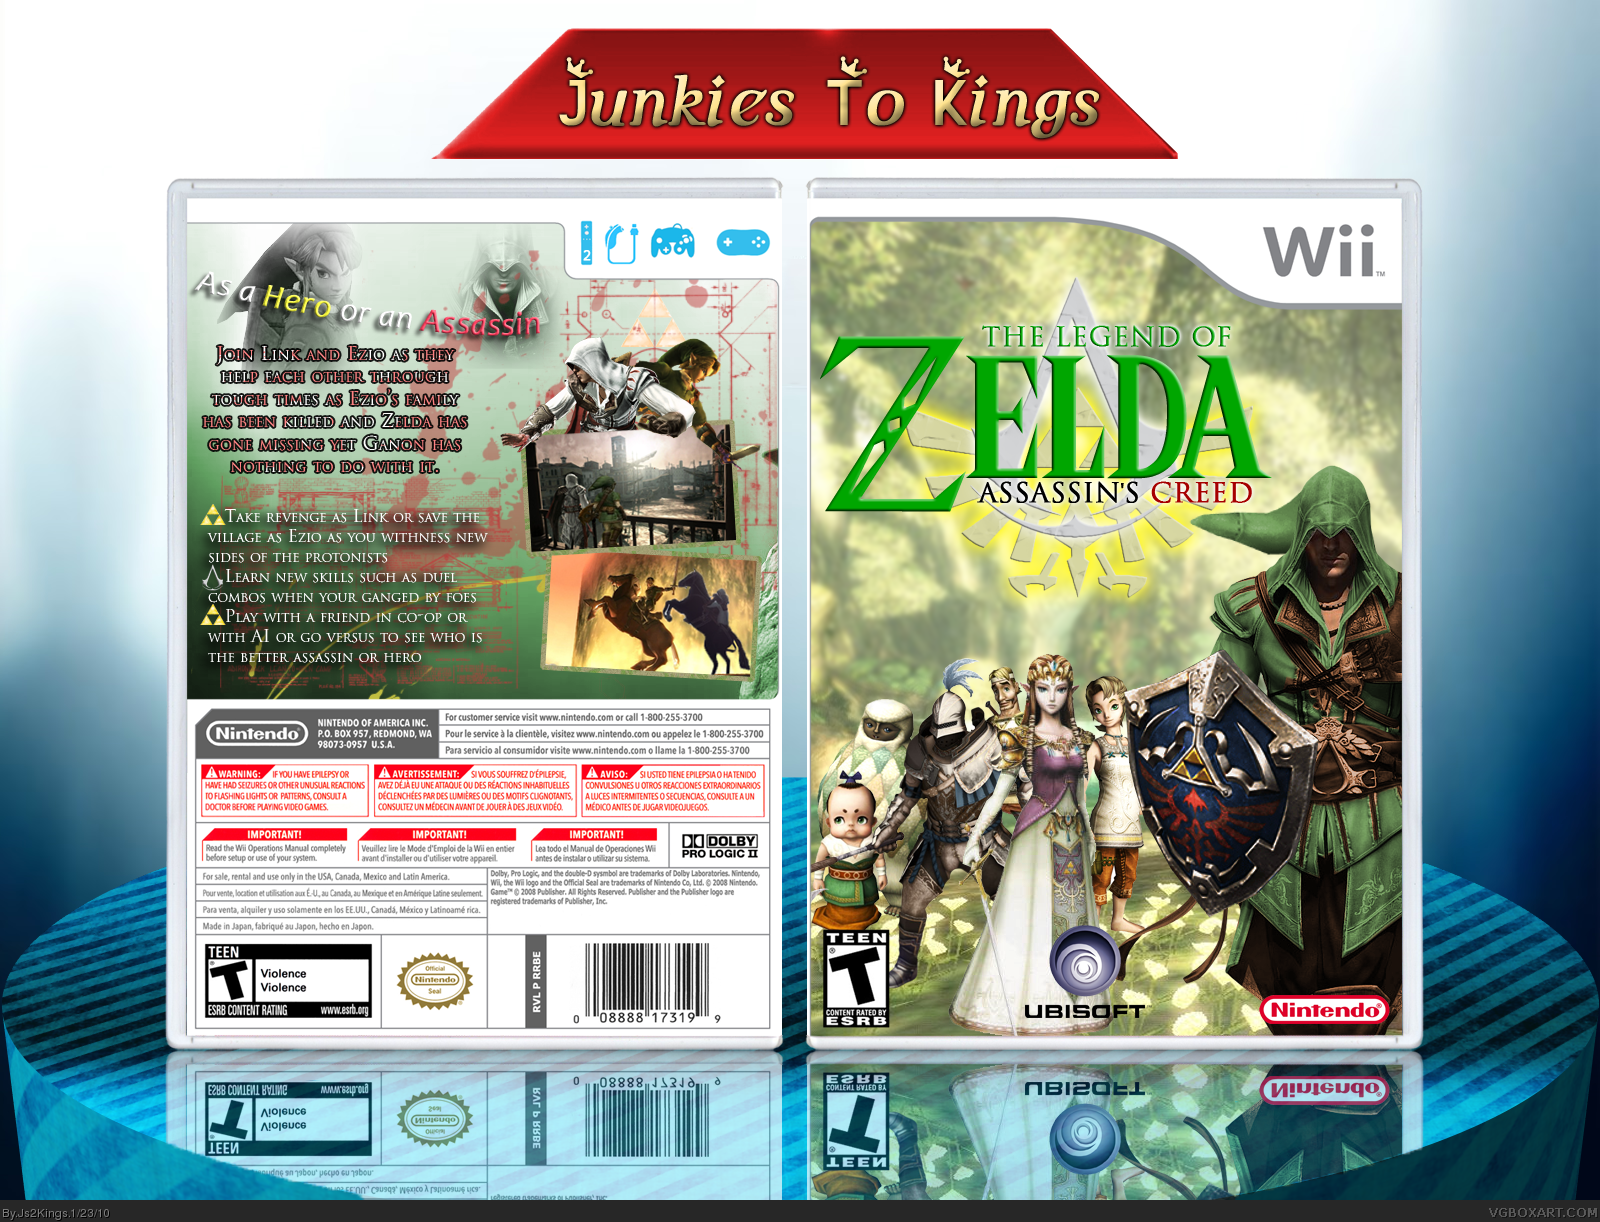 The Legend of Zelda: Assassin's Creed box cover